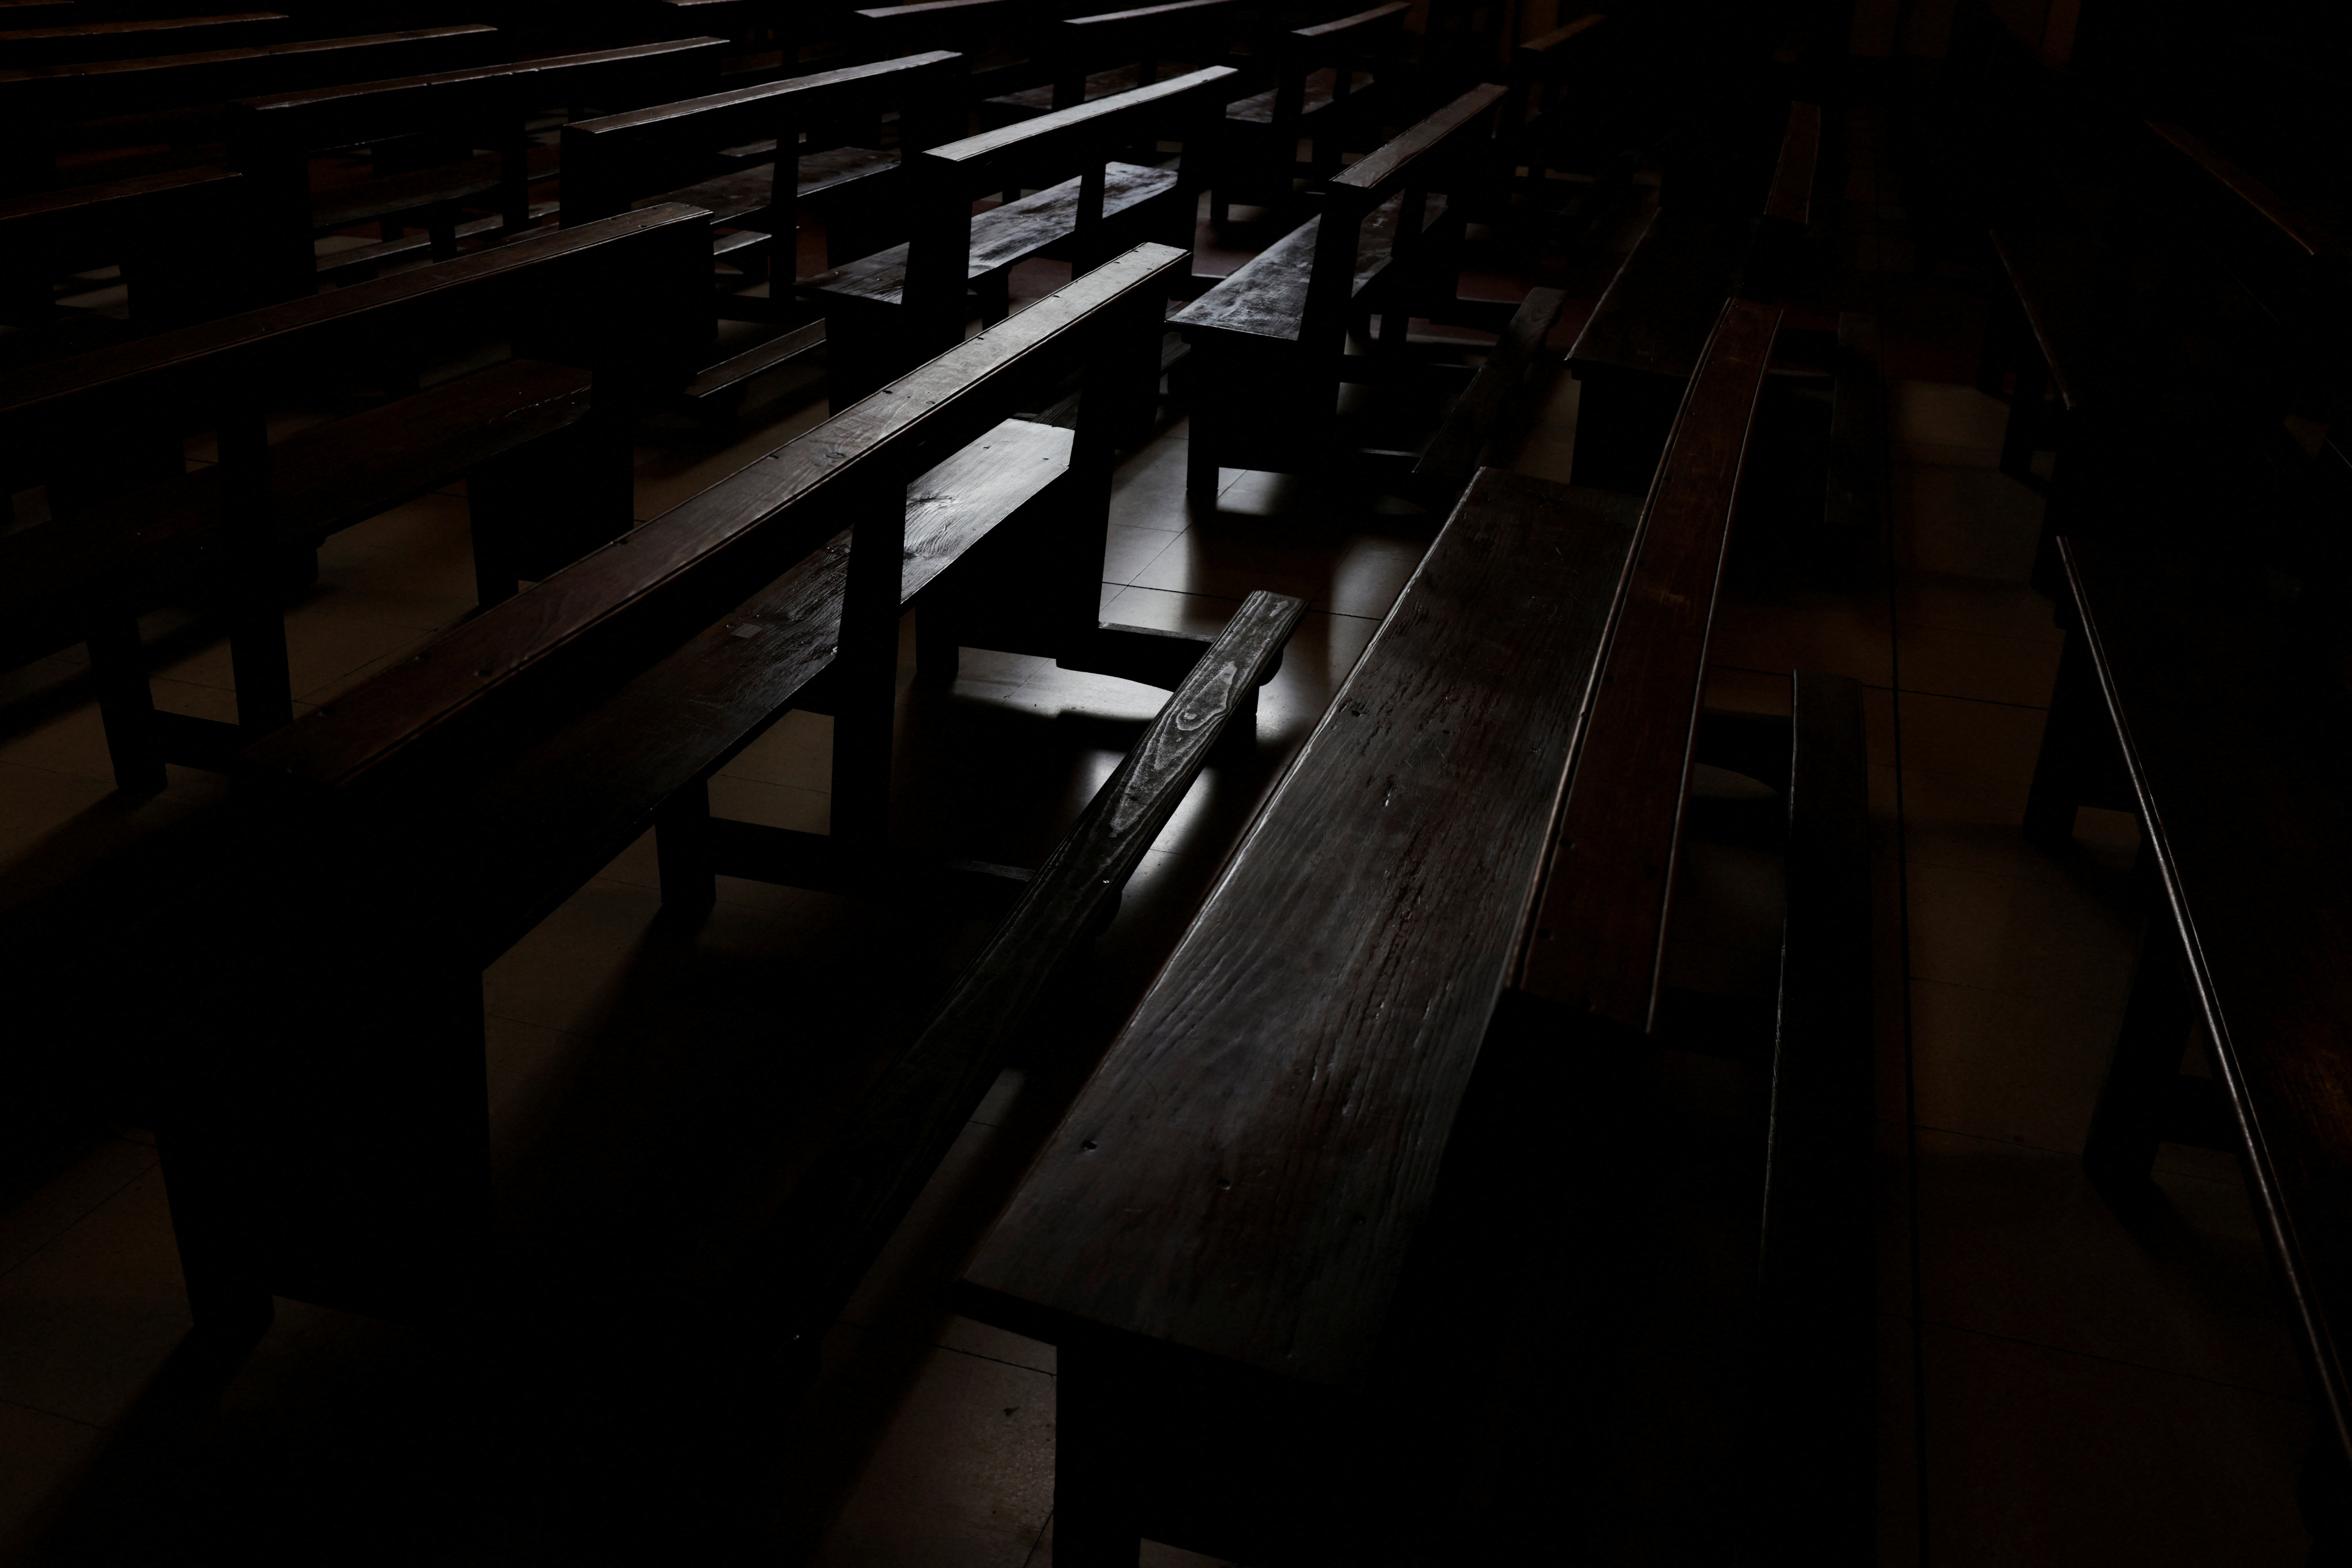 Empty pews are seen inside Catholic church in Madrid